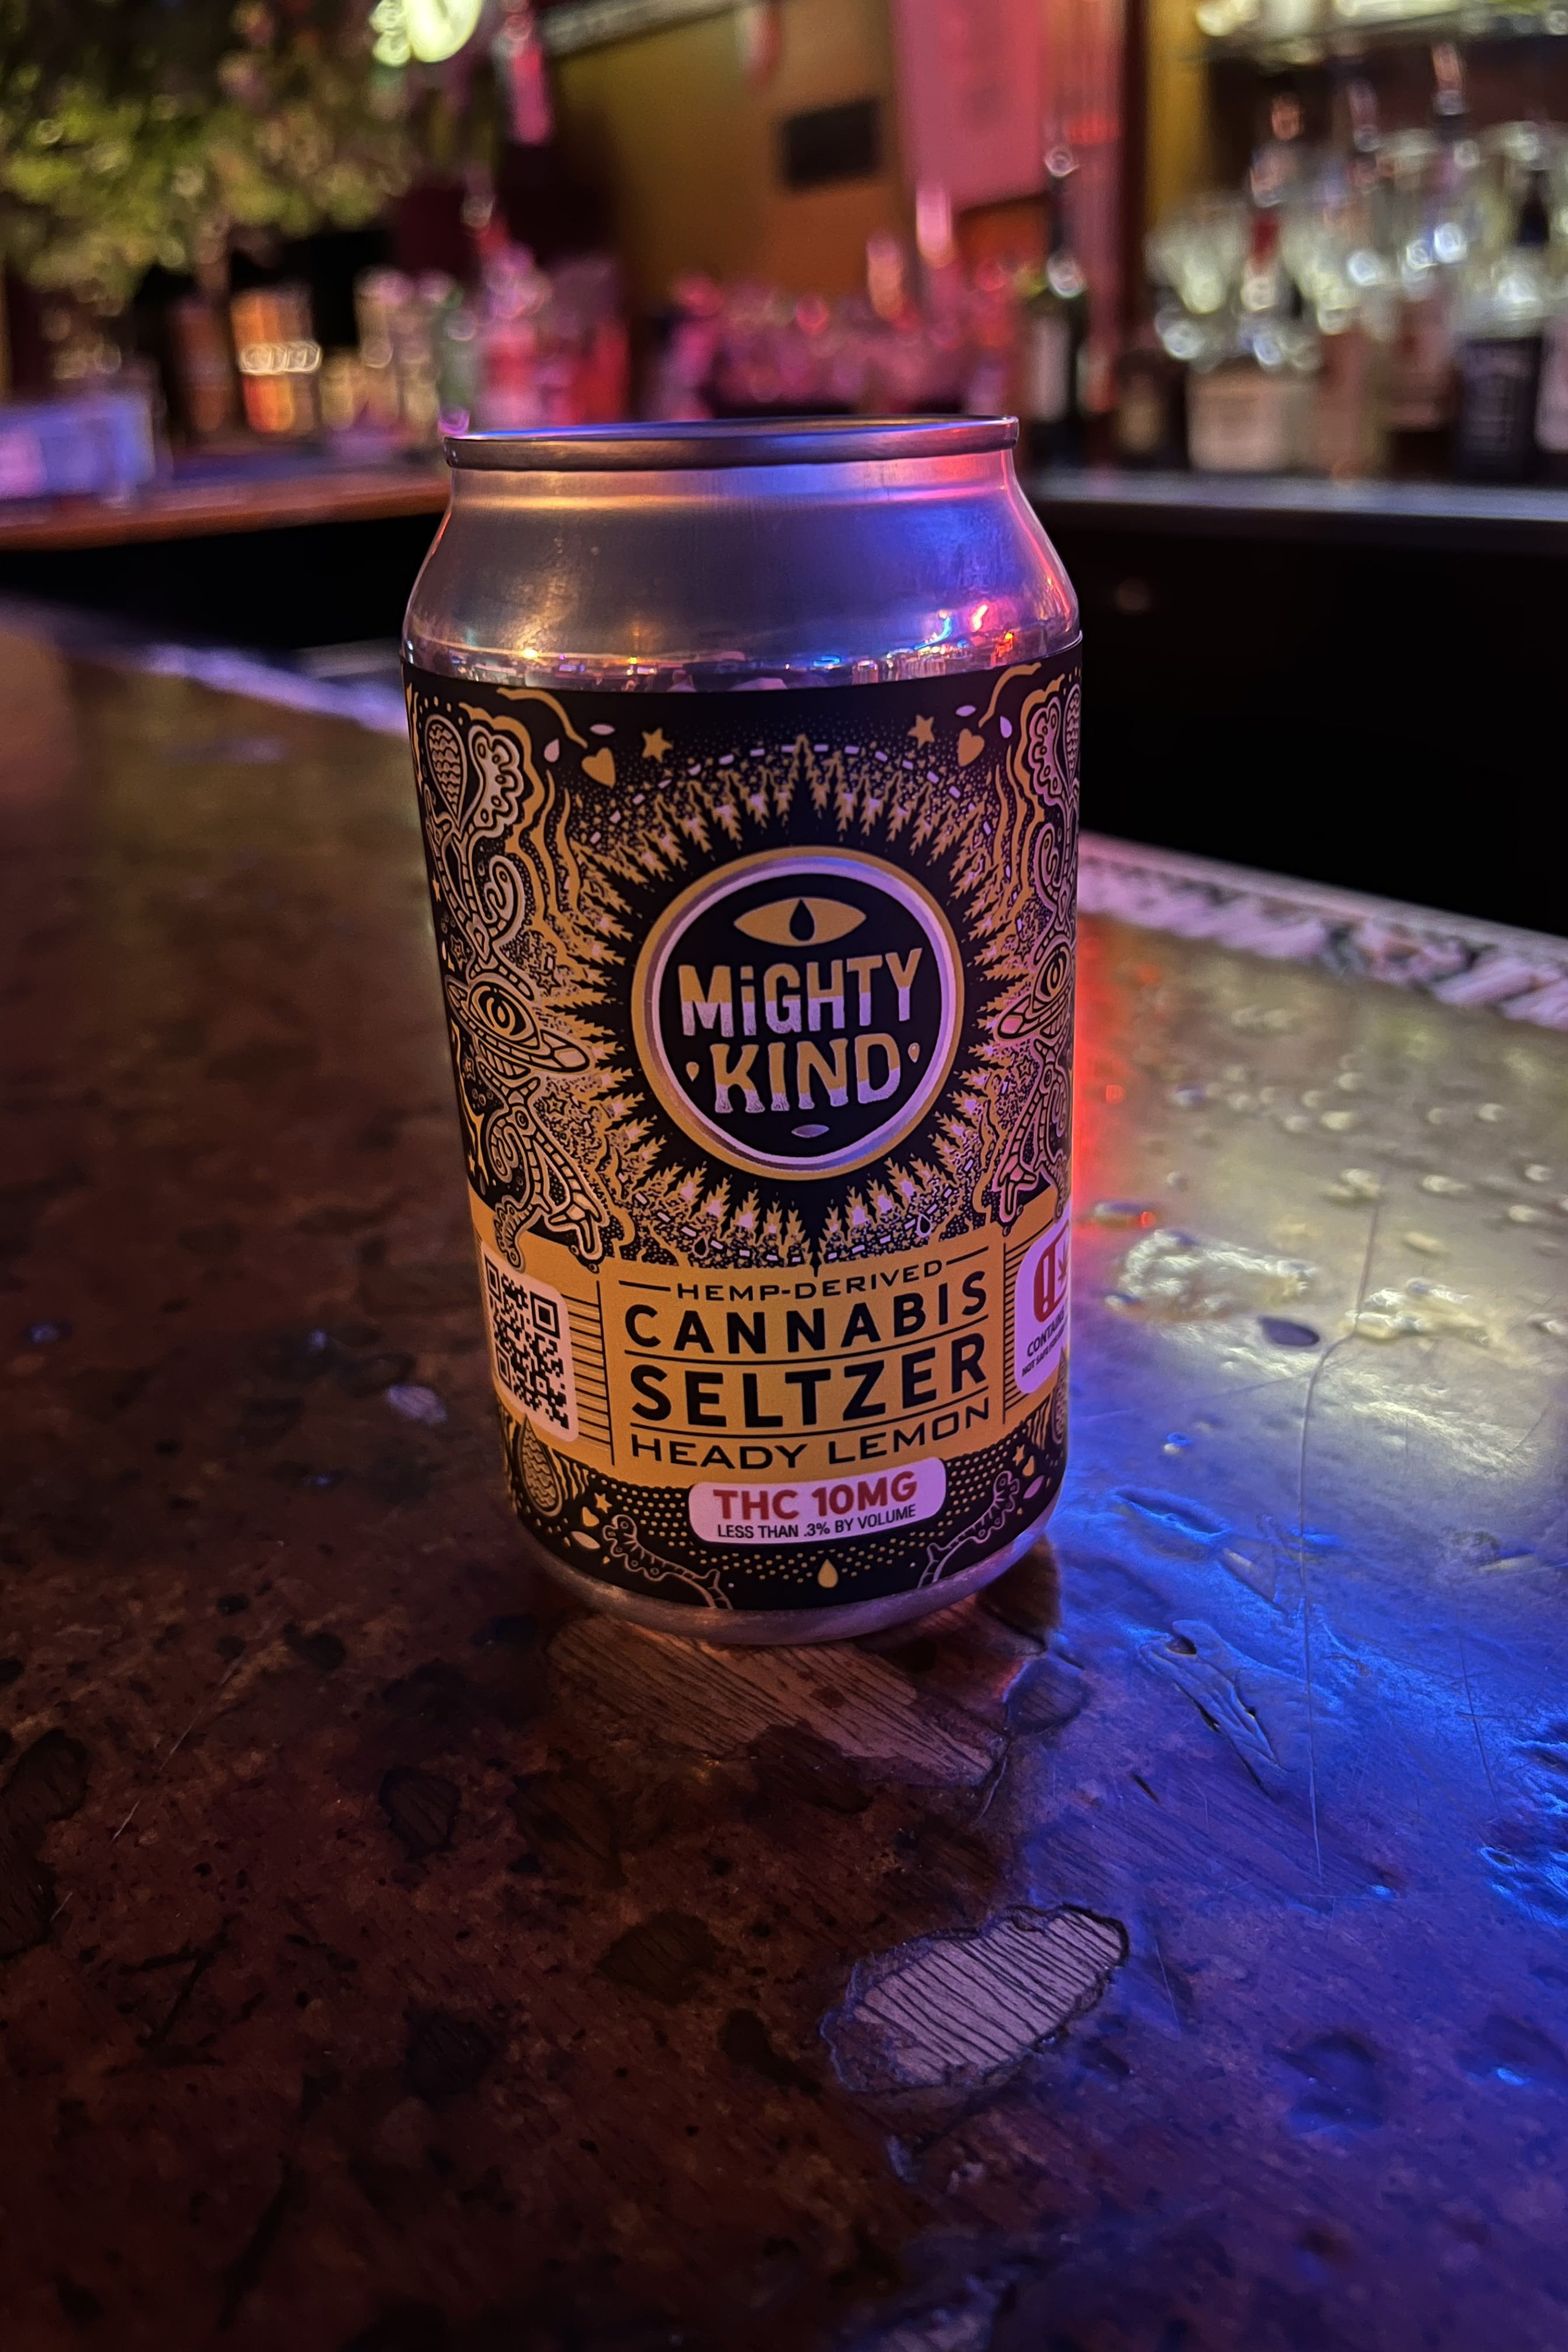 A can of "Mighty Kind Cannabis Seltzer." It has an intricate design and yellow label.